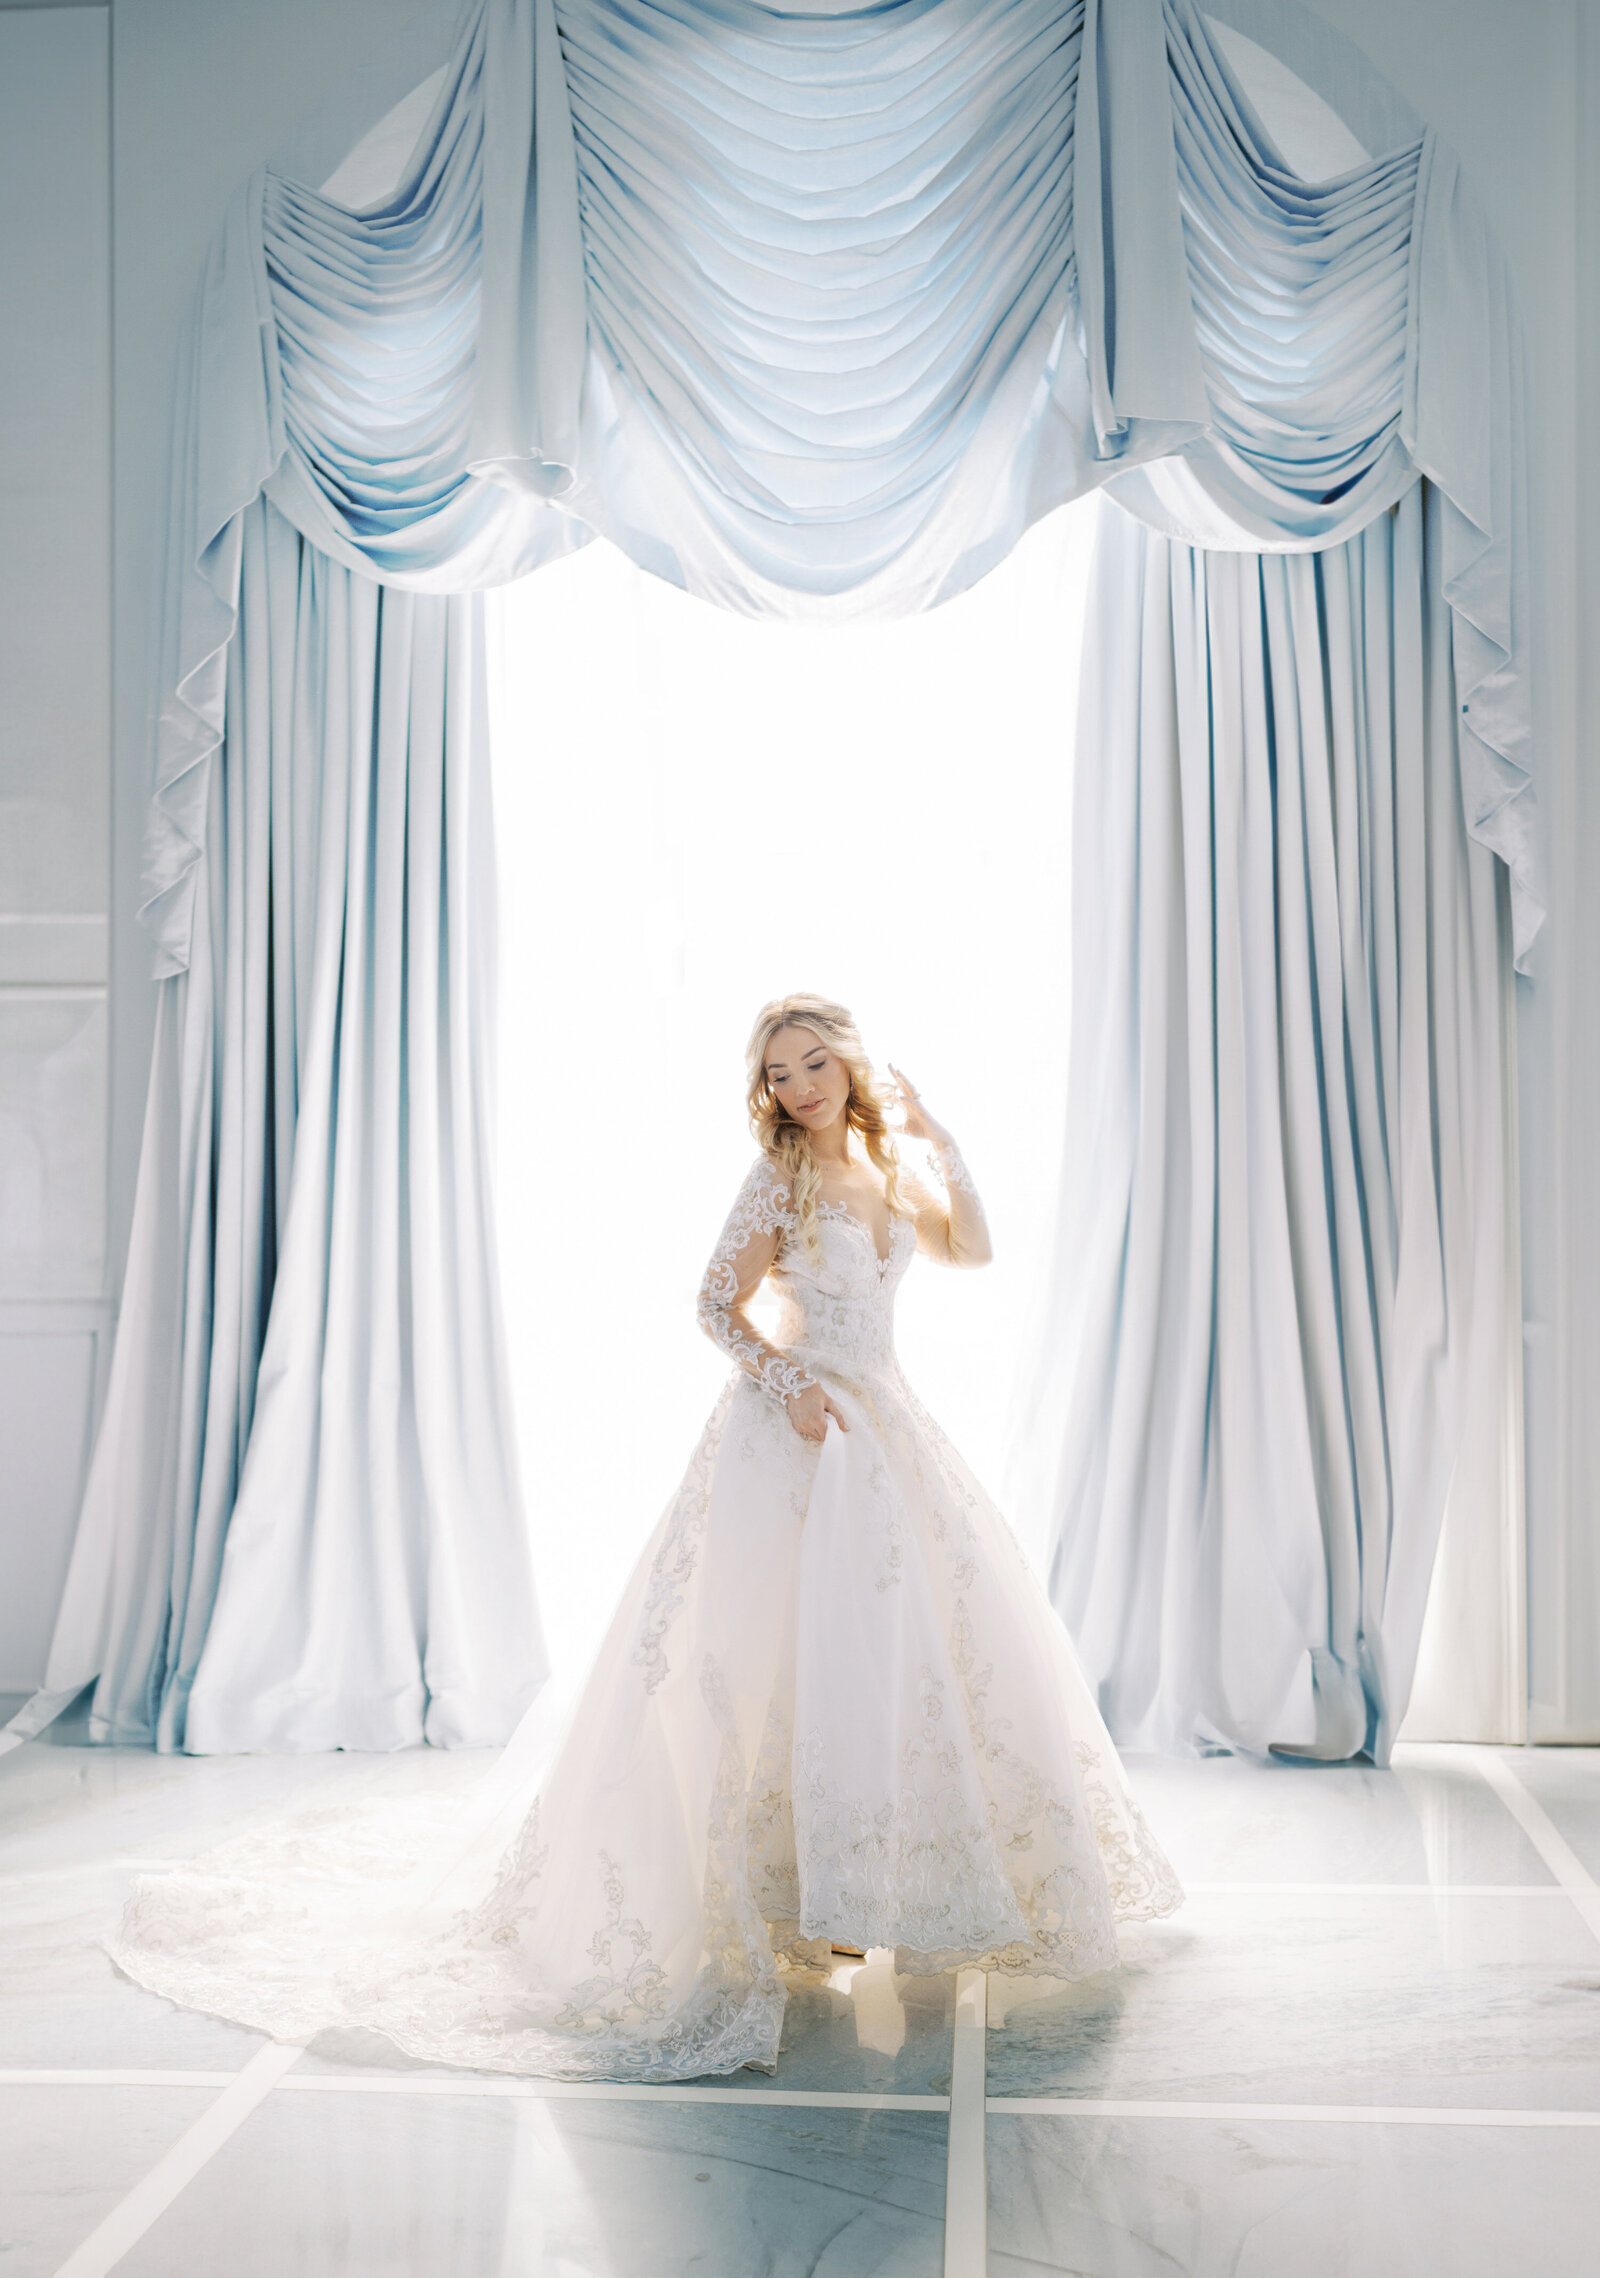 Nemacolin-Luxury-Wedding-Planner-French-Blue-Palette-Novalee-Events-Co-Romantic-Wedding-Gown-Blue-Room-1